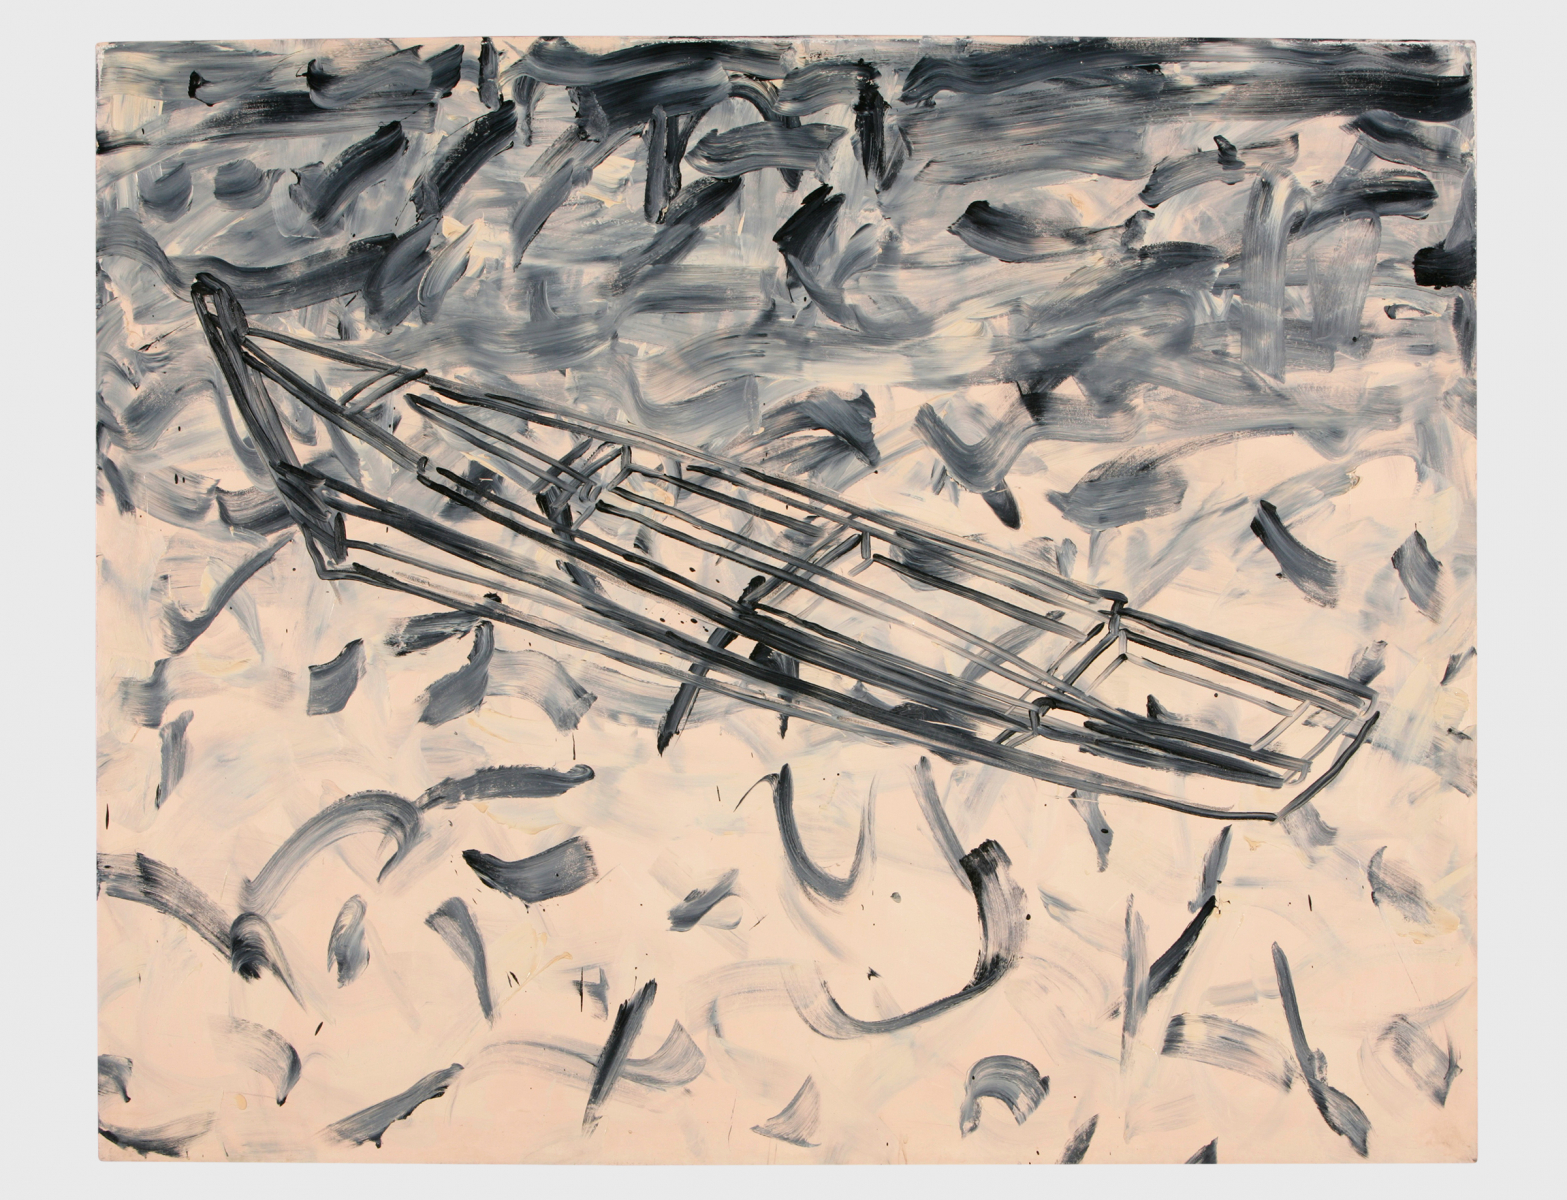 Untitled-88005, 1988, Oil on Canvas, 181.8x227.3cm